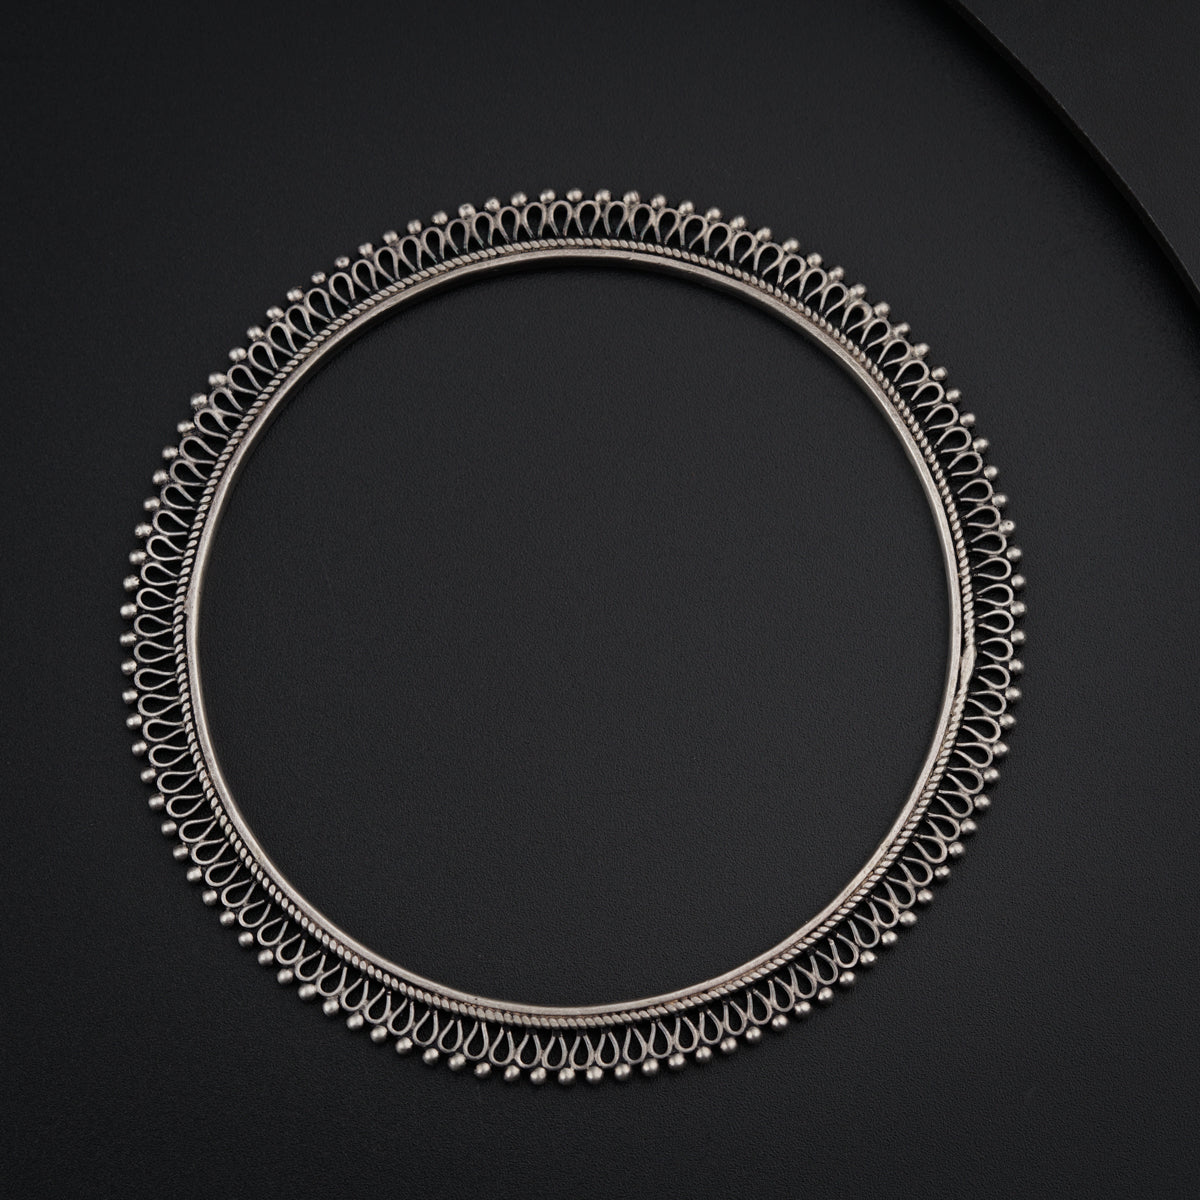 a circular metal object on a black surface